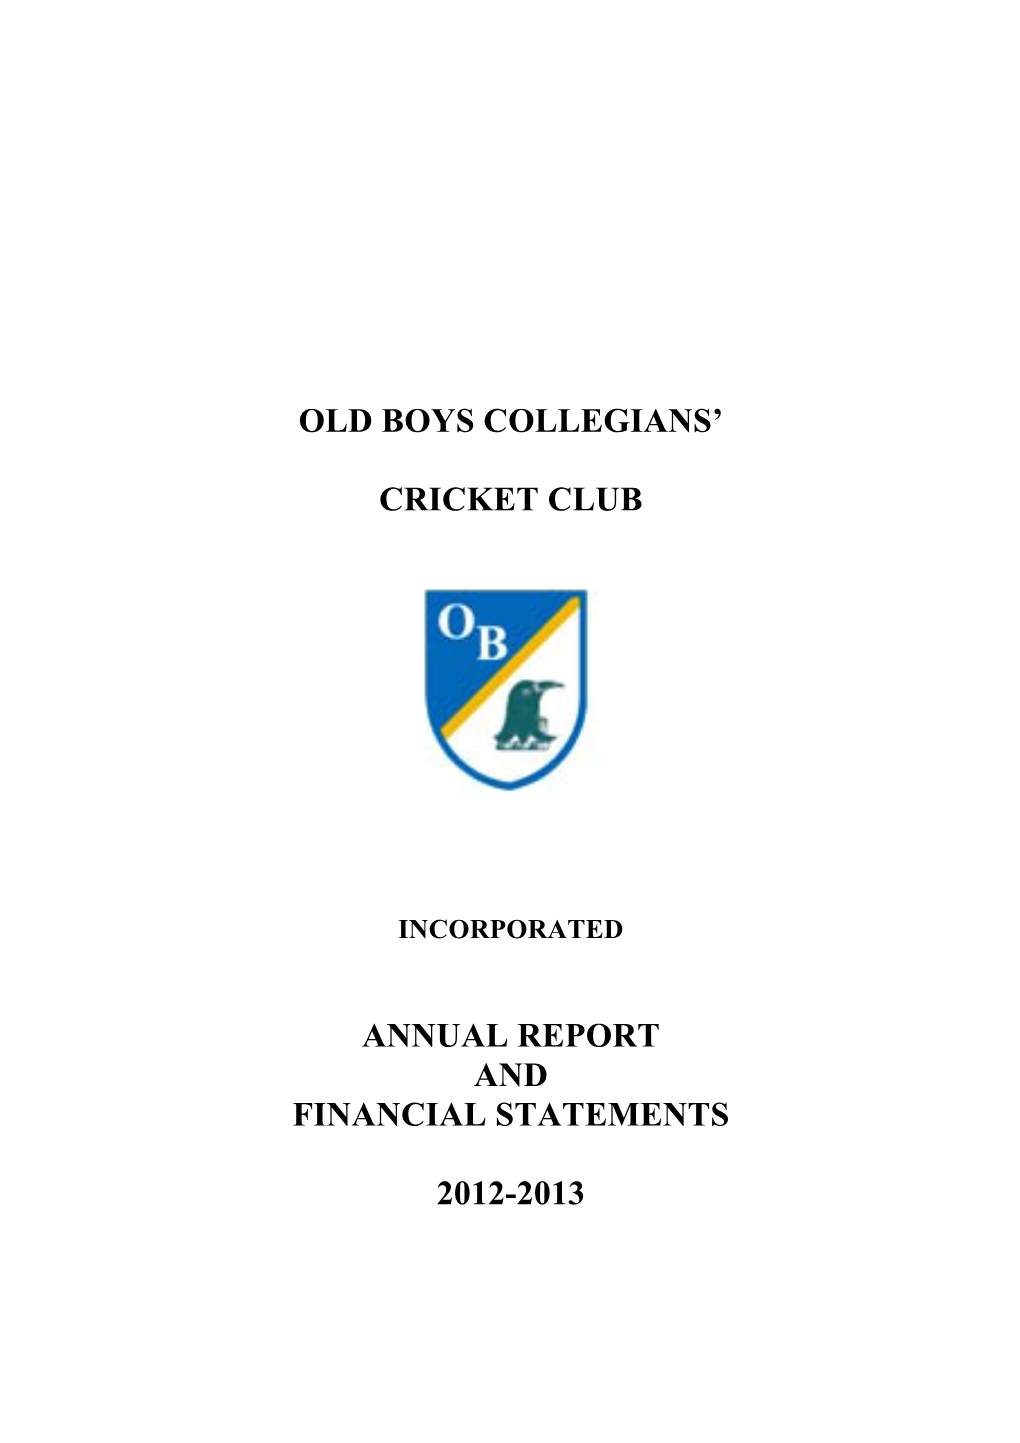 Annual Report and Financial Statements 2012-2013